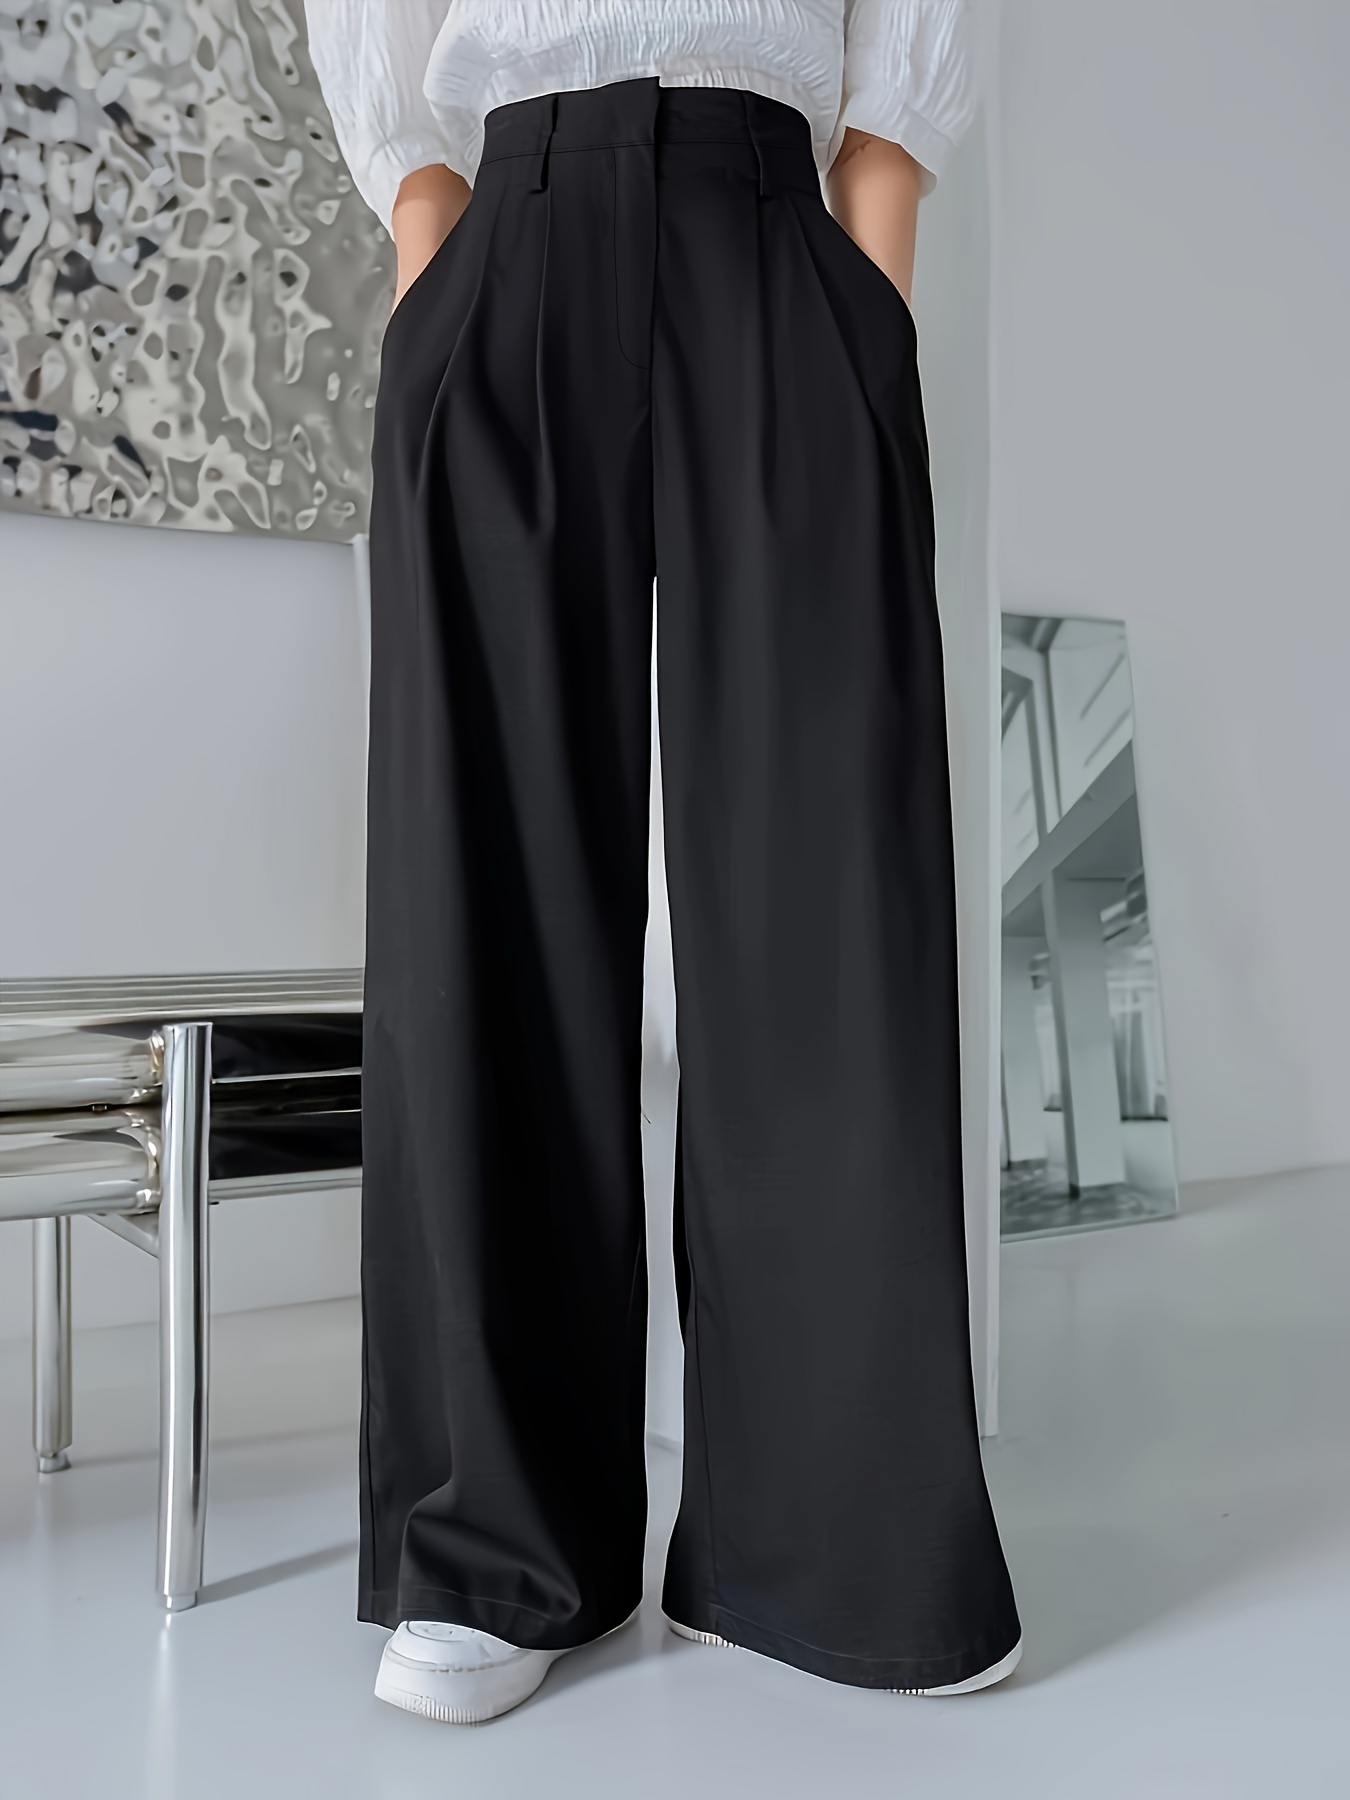 Stretchy High Waist Wide Leg Pants Casual Black Ankle Length